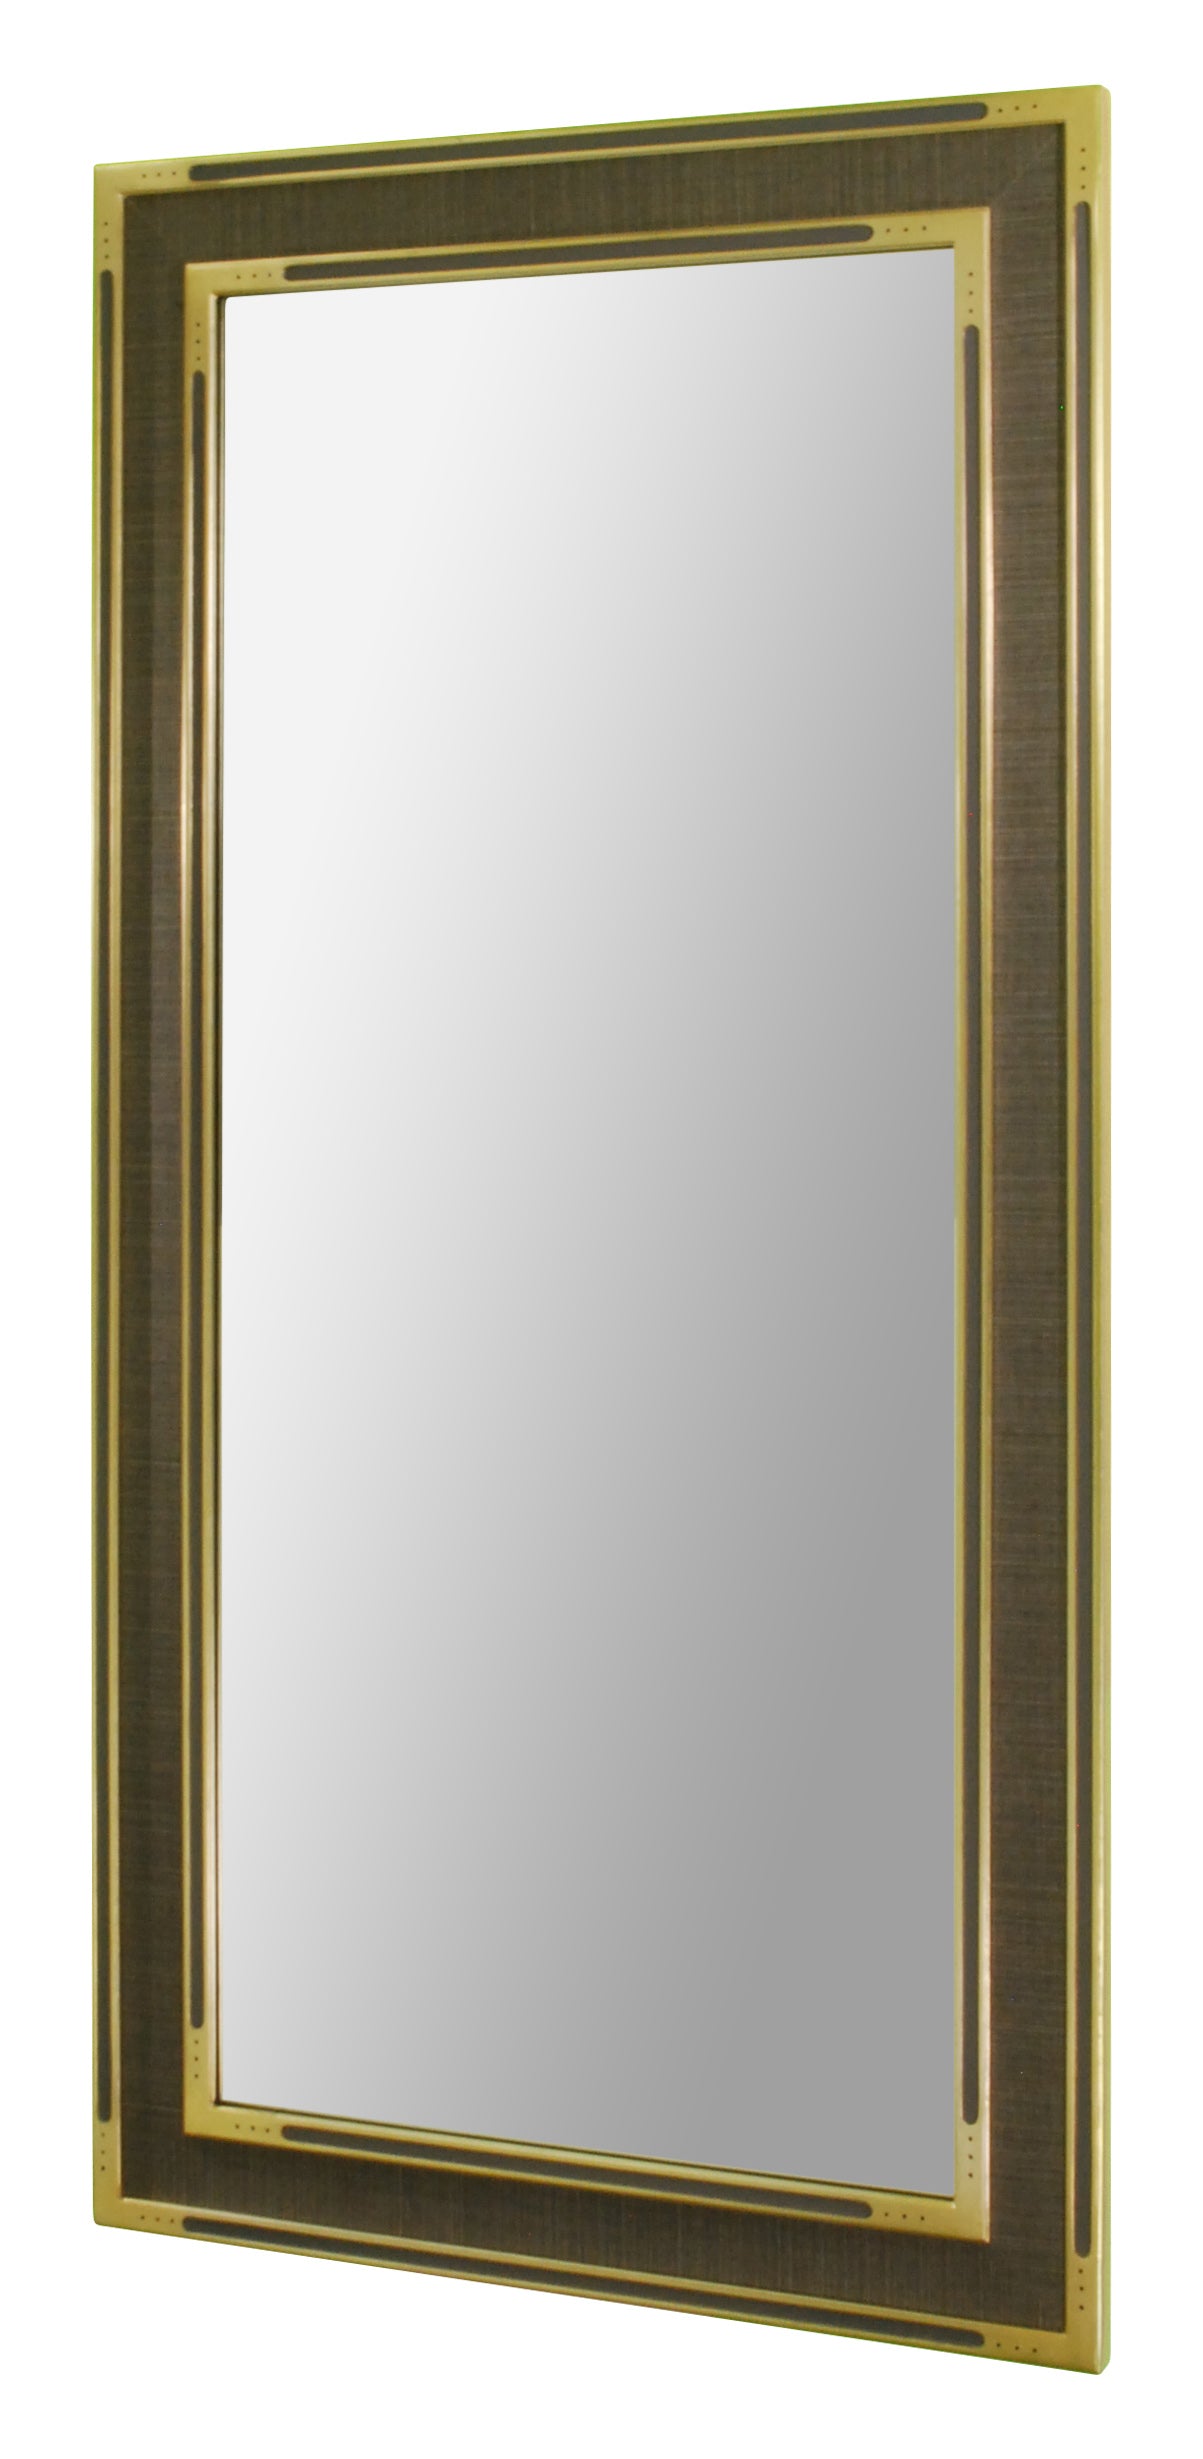 Full length Charcoal grey linen wrapped frame with brass by paint edges